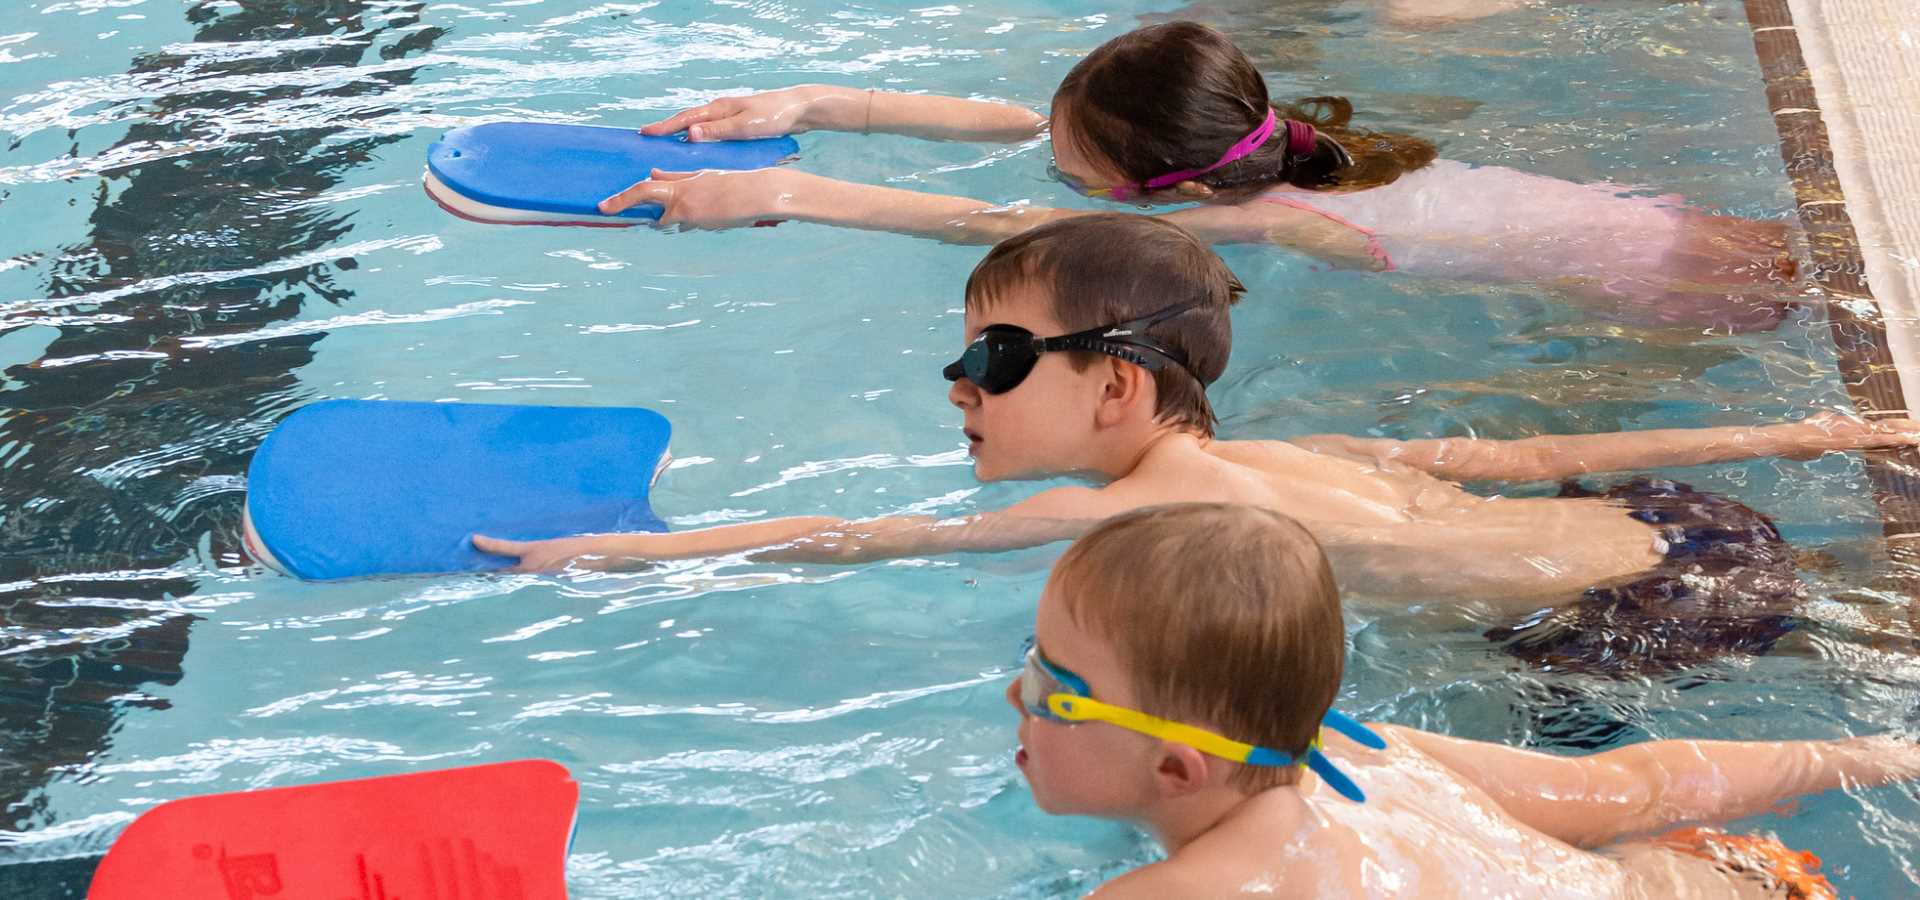 A group of children holding floats in the swimming pool